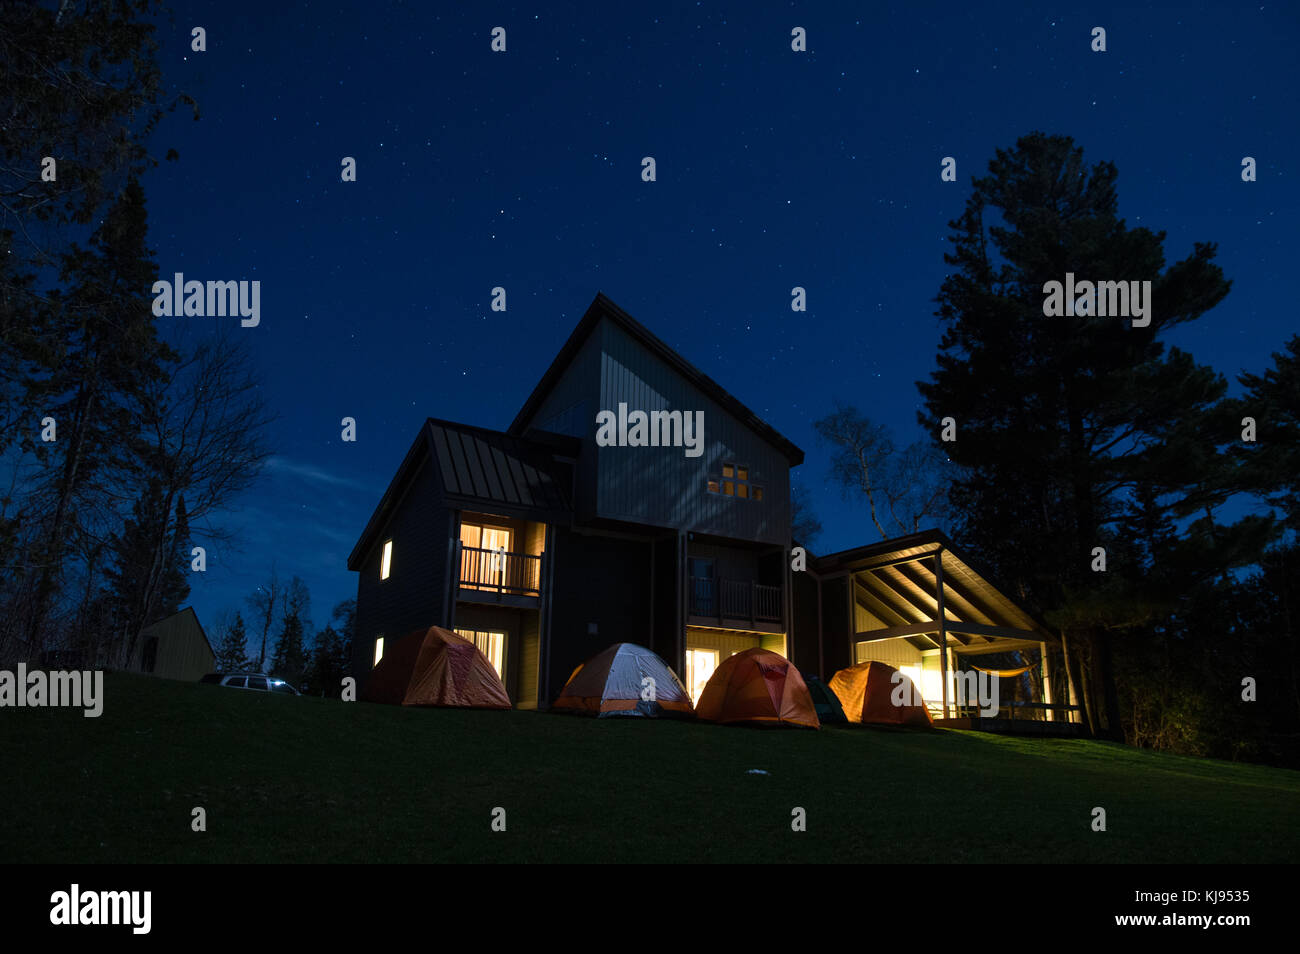 Campers' tents and guesthouse, Headlands International Dark Sky Park, Mackinaw City, Michigan Stock Photo